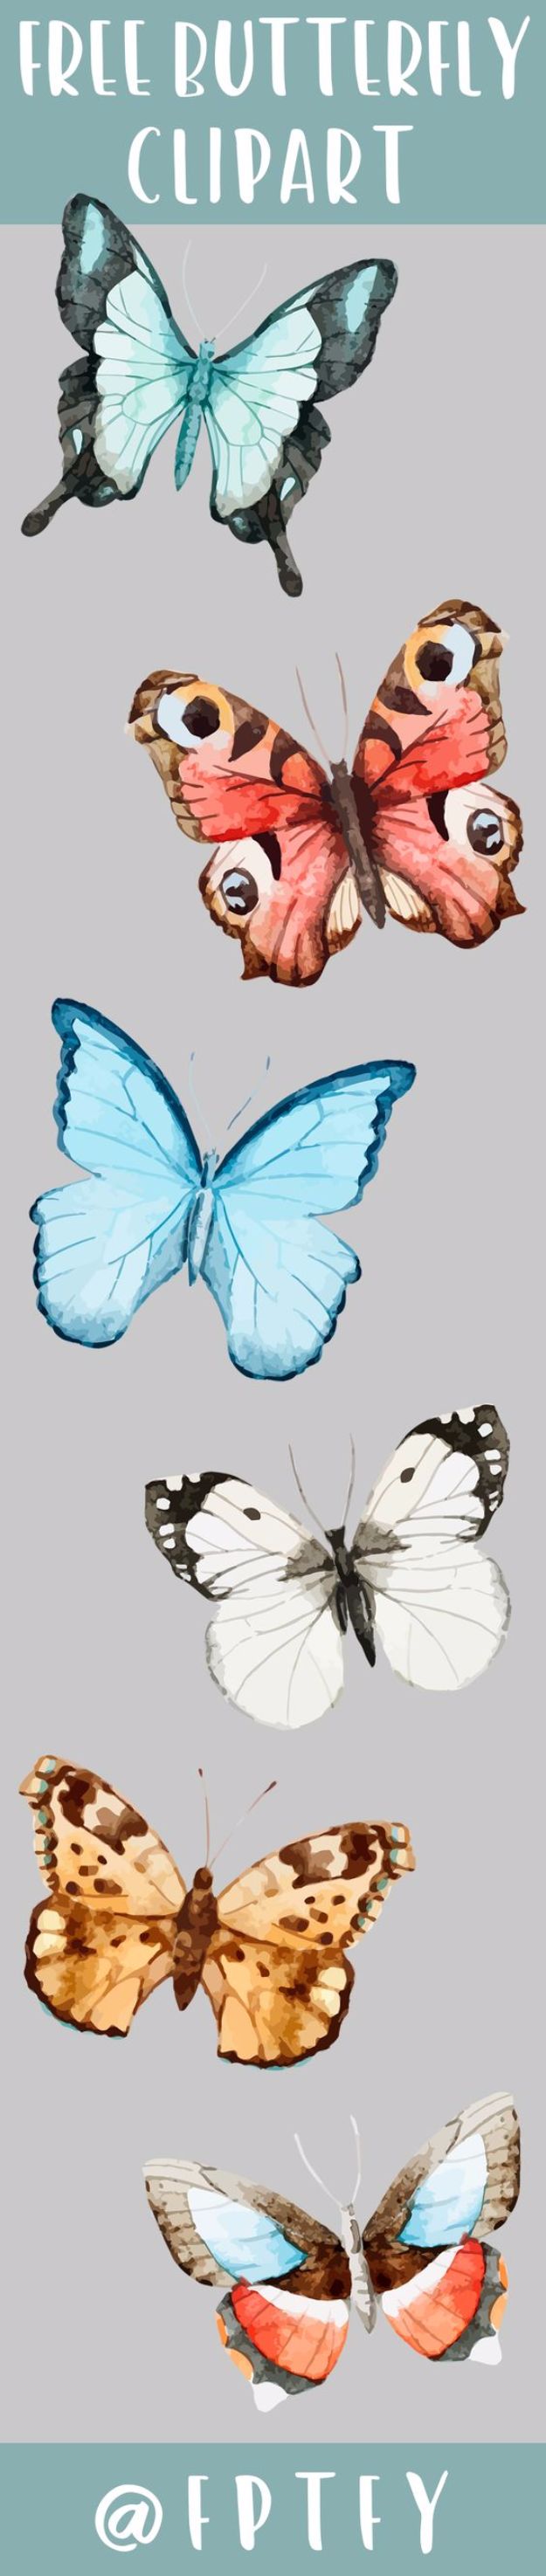 DIY Ideas With Butterflies - Butterfly Clip Art - Cute and Easy DIY Projects for Butterfly Lovers - Wall and Home Decor Projects, Things To Make and Sell on Etsy - Quick Gifts to Make for Friends and Family - Homemade No Sew Projects- Fun Jewelry, Cool Clothes and Accessories #diyideas #butterflies #teencrafts